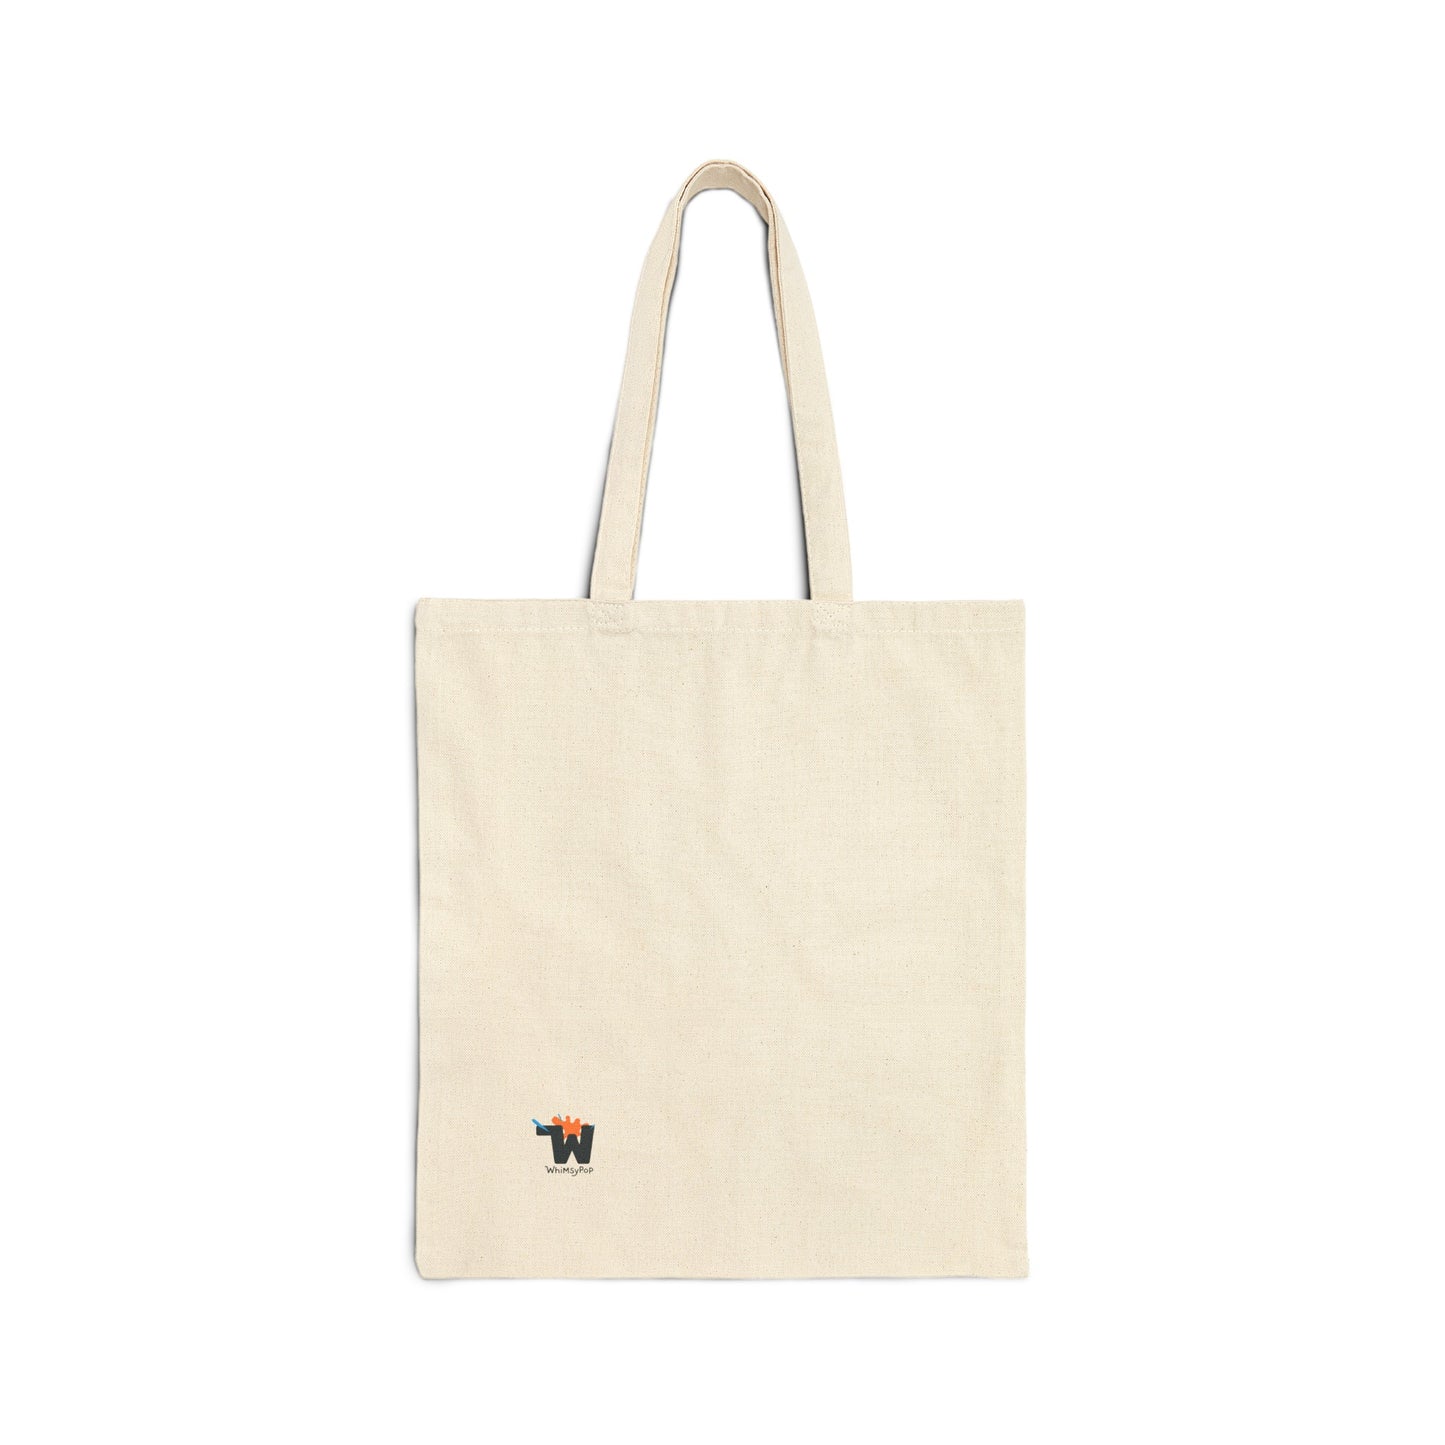 Cotton Canvas Tote Bag - Star Shaped Spill Collection - Cows Country